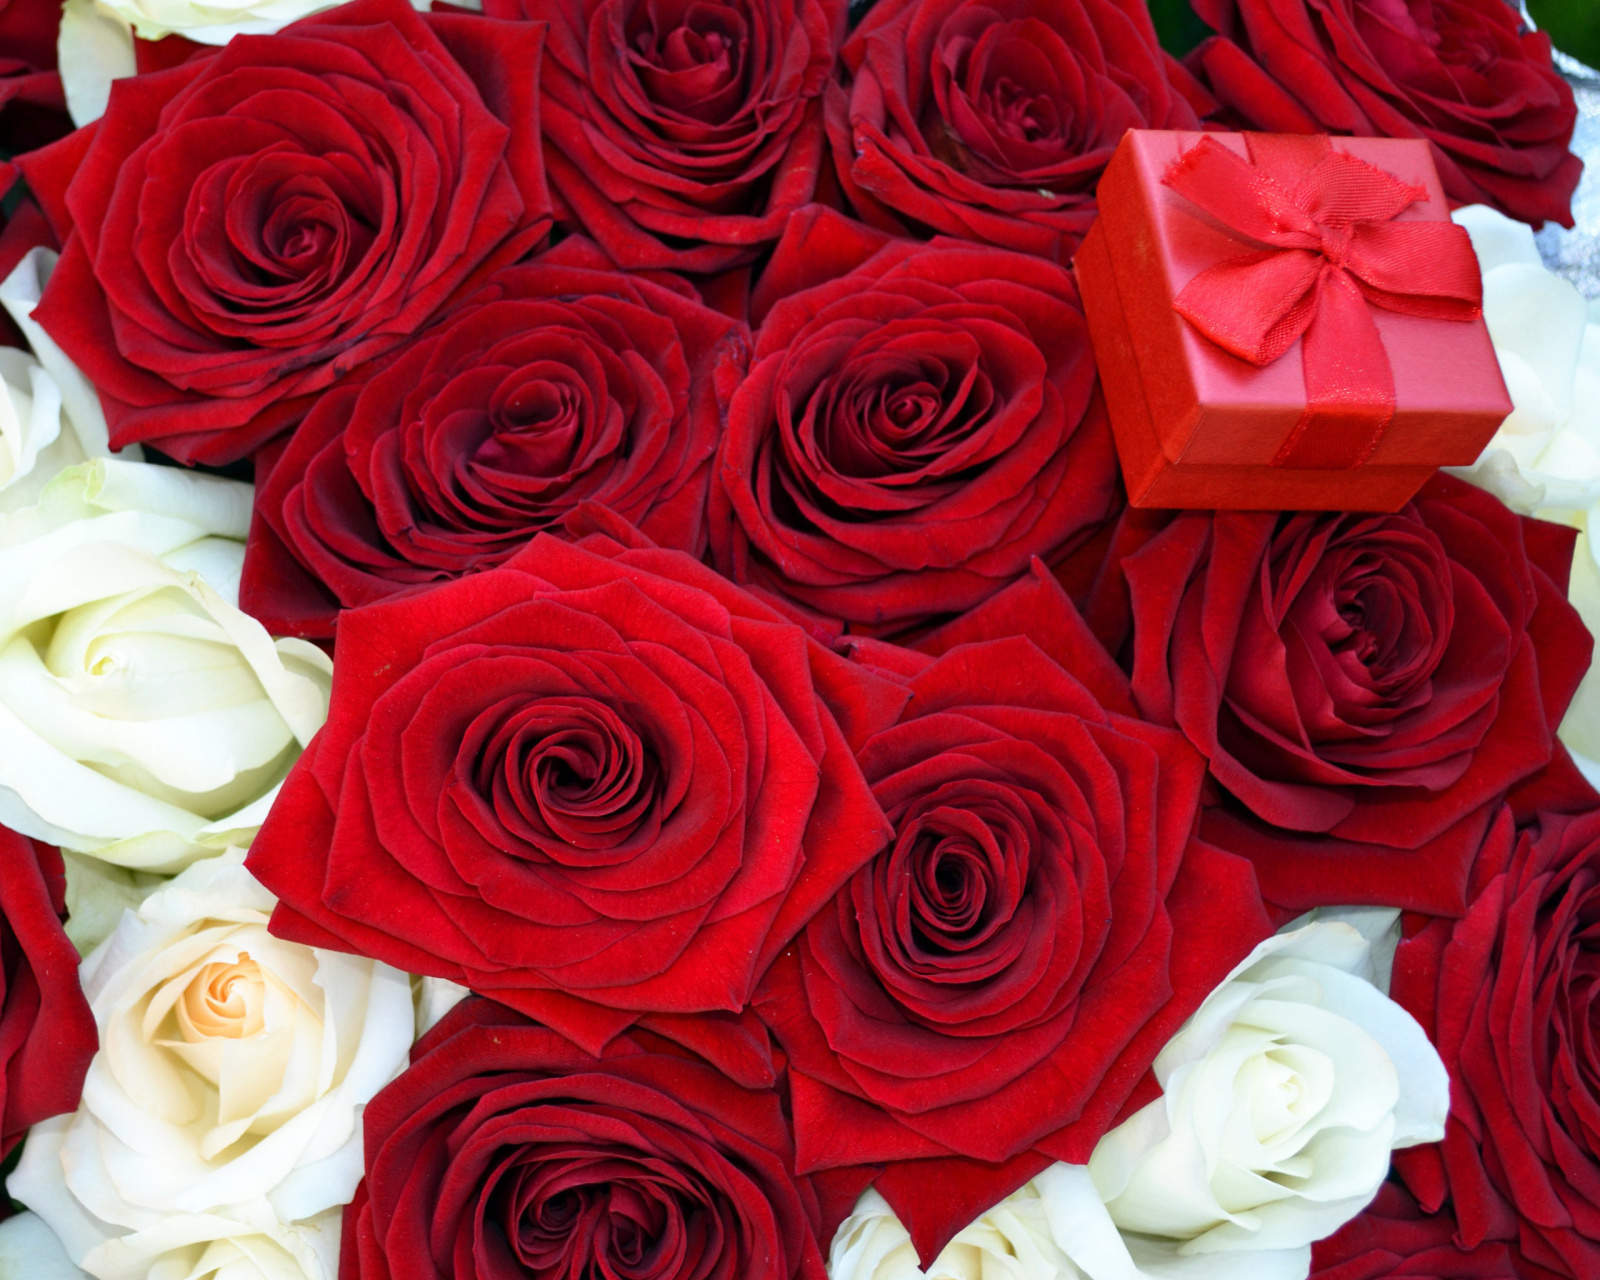 Das Roses for Propose Wallpaper 1600x1280